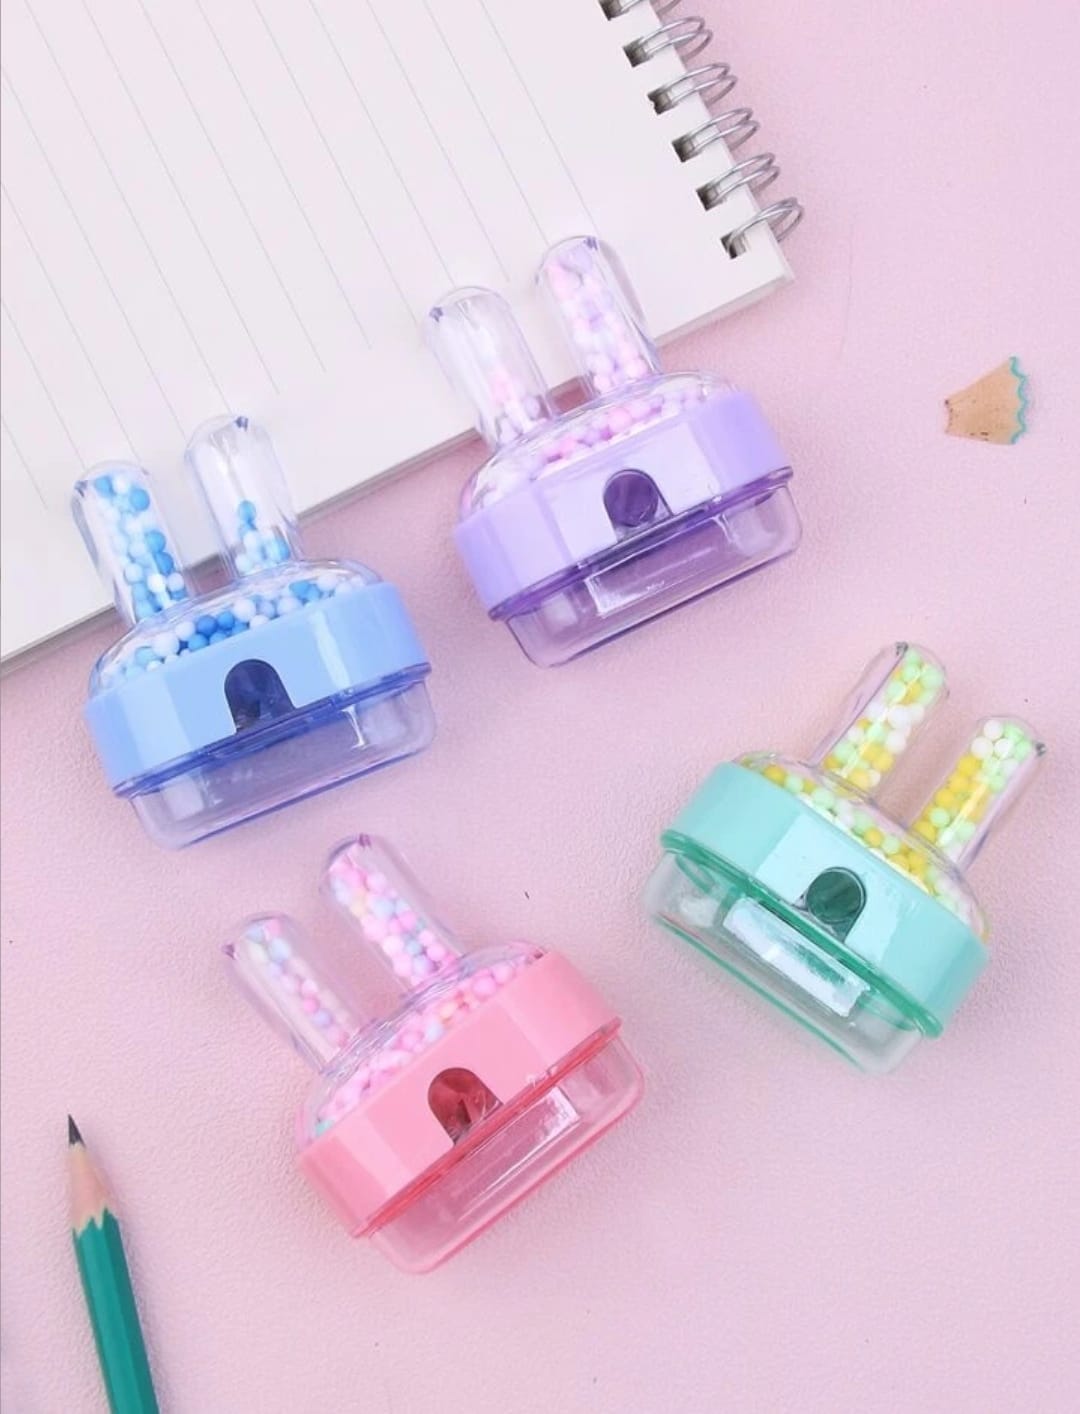 Paradise Soft Toys Sharpeners Colorful Small Table Sharpener - Perfect for Home, Office, and School Use!